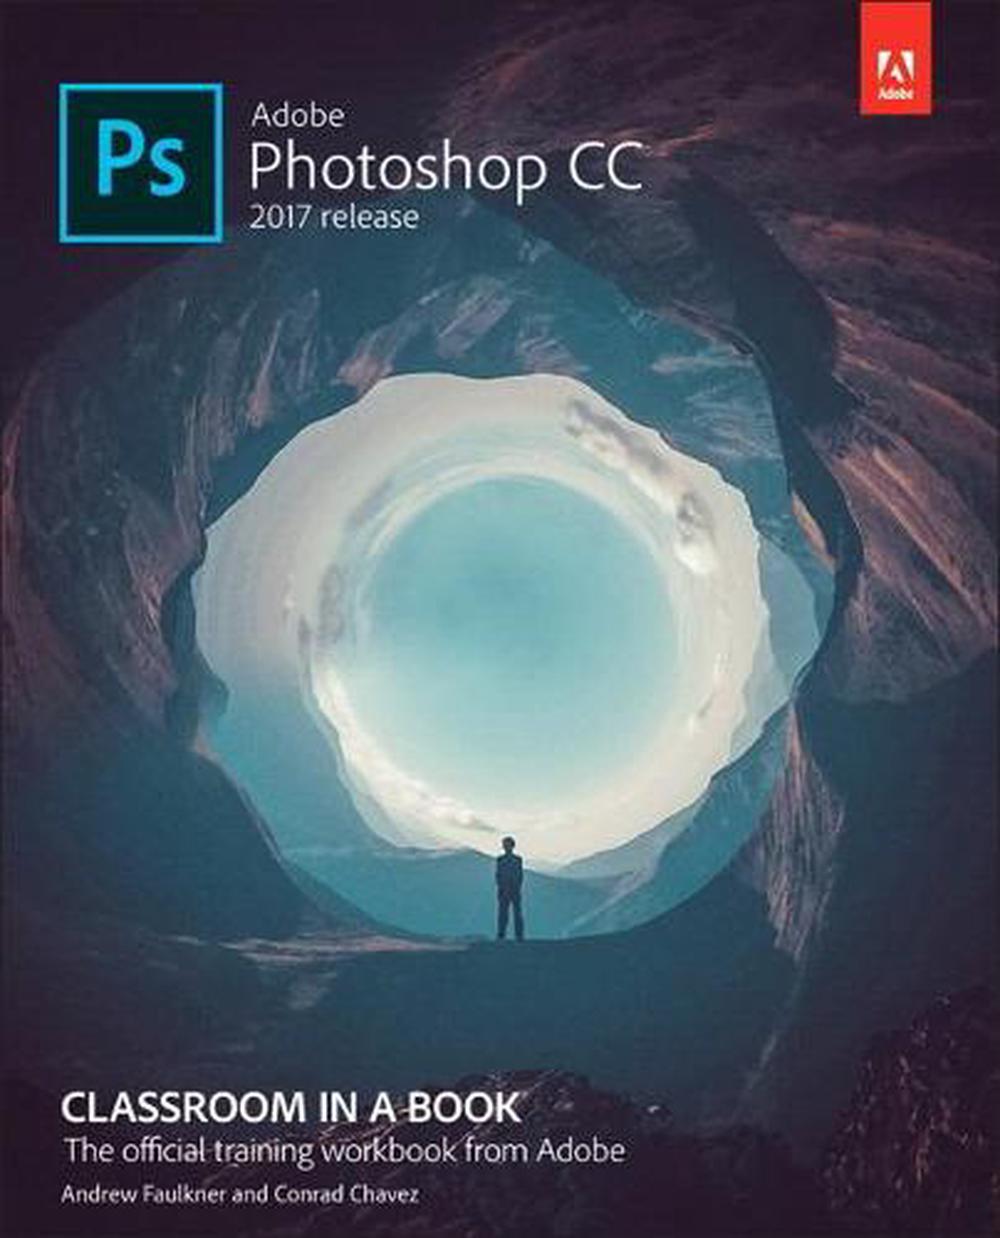 adobe photoshop cs5 classroom in a book review